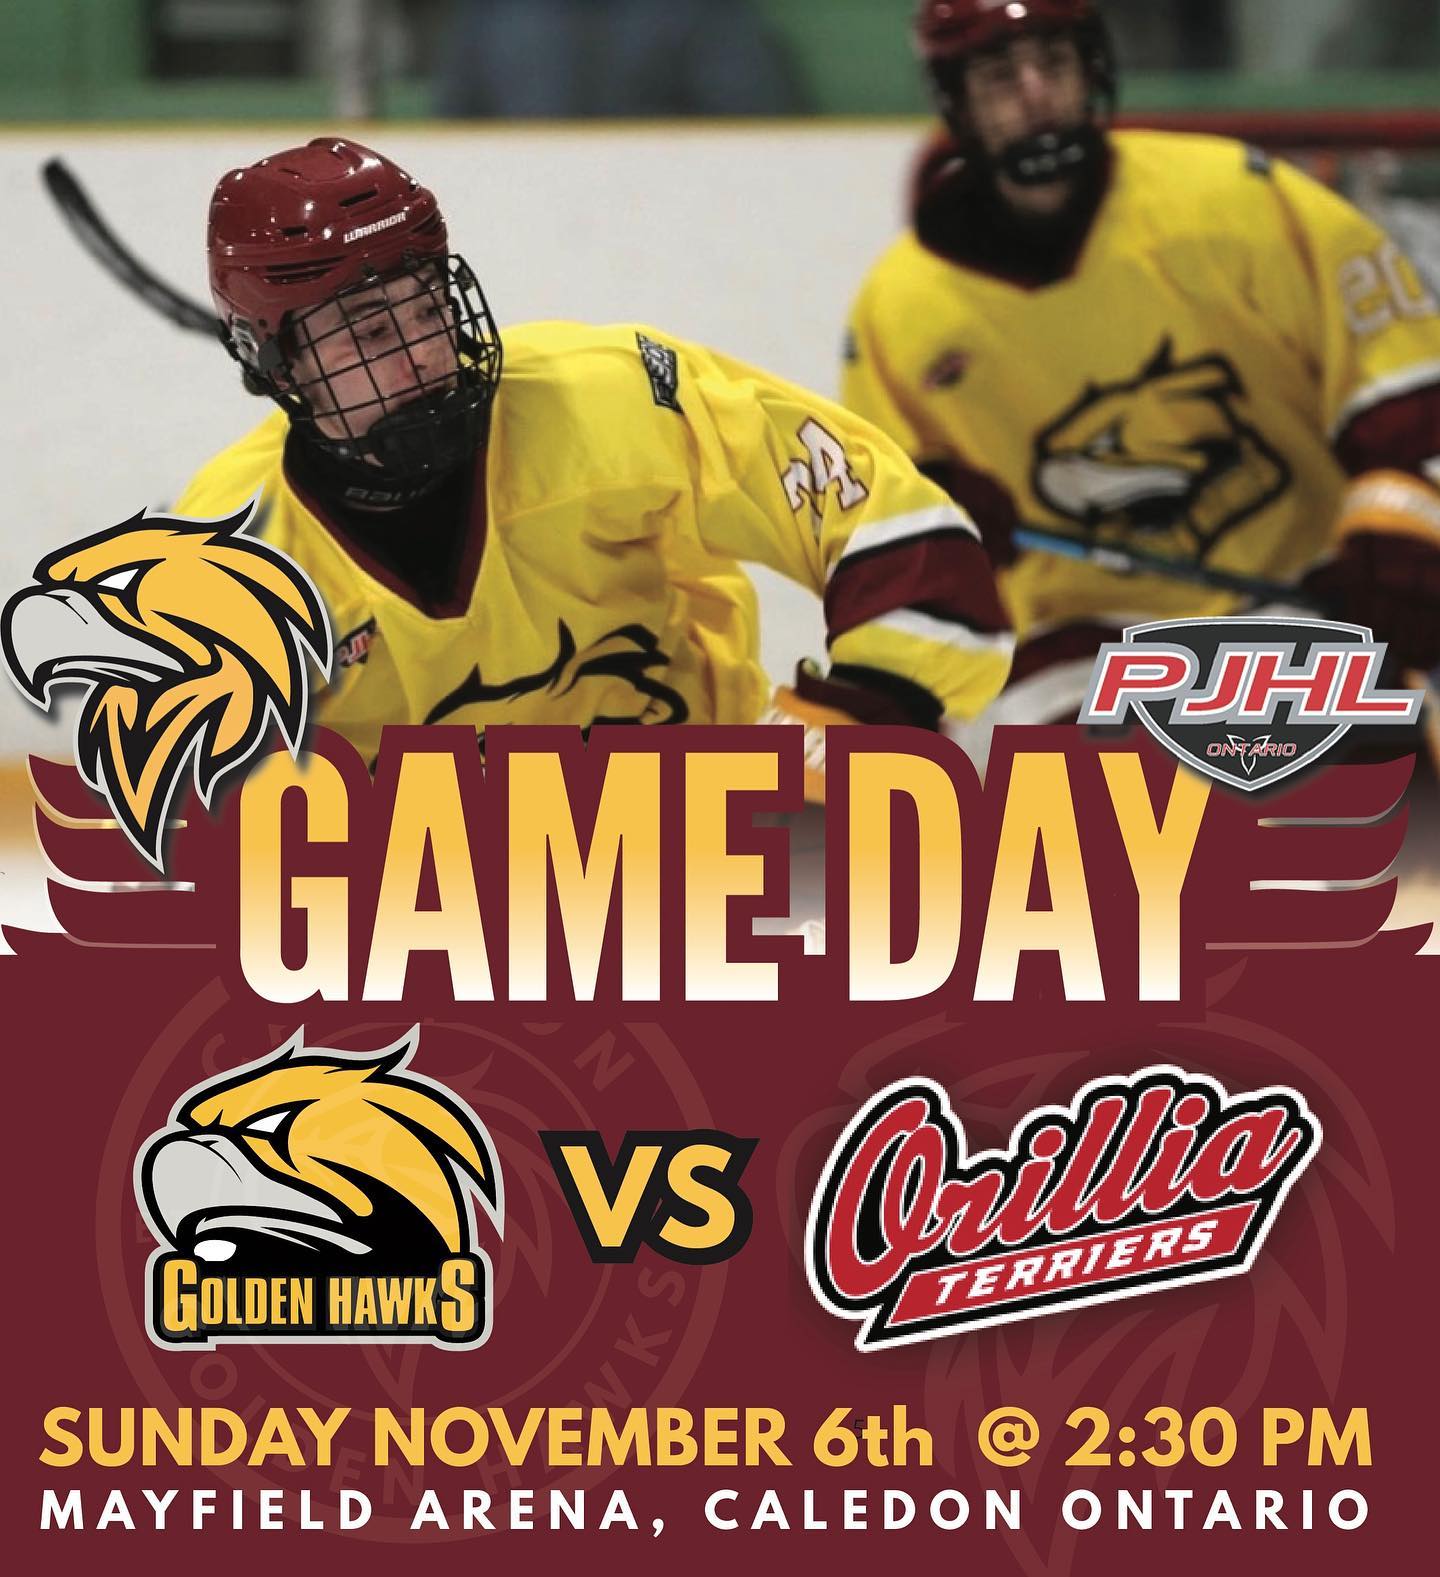 [ GAME DAY ]  Golden Hawks are back at the nest to take on the Orillia Terrier’s. Sunday November 6th @ 2:30 pm Mayfield Arena Caledon. #caledongoldenhawks #letsgo